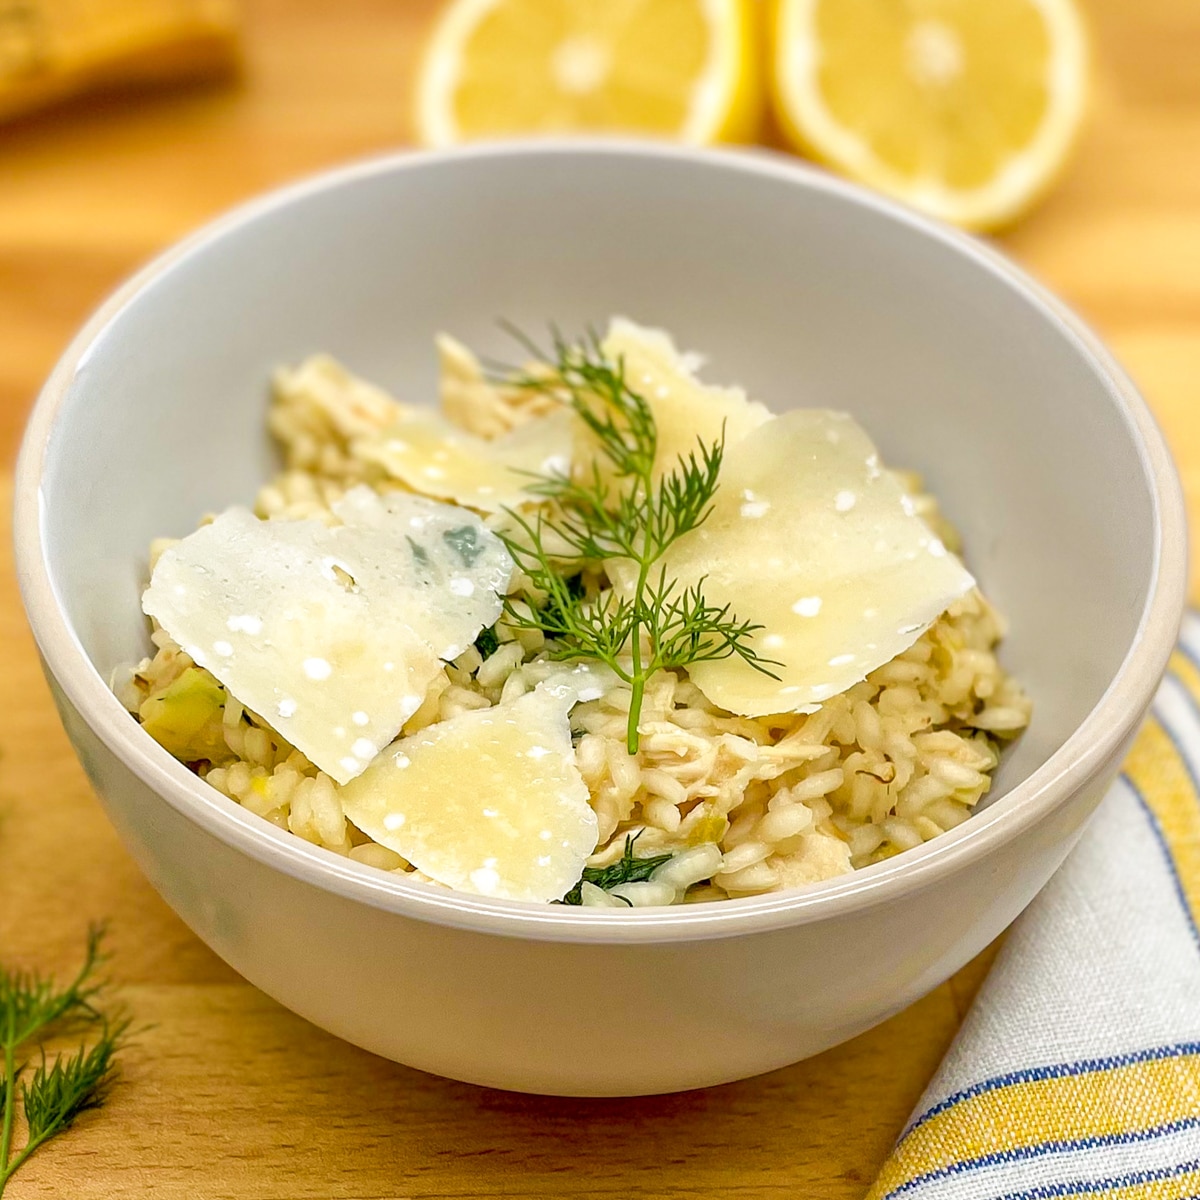 Chicken and leek risotto topped with fresh dill and shaved parmesan in a white bowl on a wood cutting board surrounded by lemons, fresh dill and a yellow and blue gingham napkin.